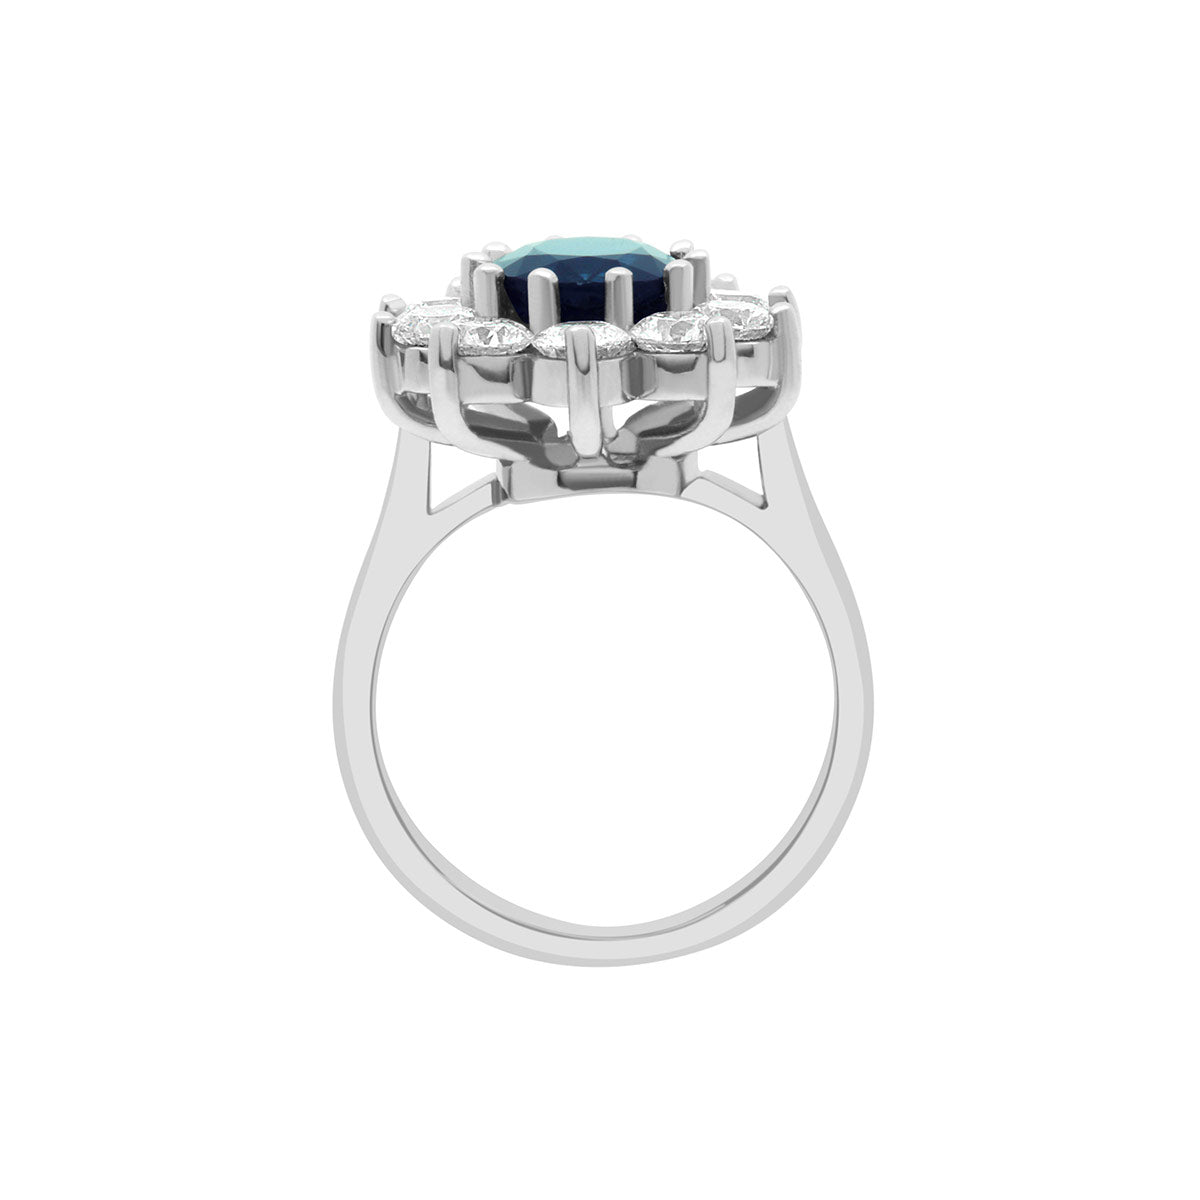 Sapphire Engagement Ring in white gold with a cluster of sparkling white diamonds upright position